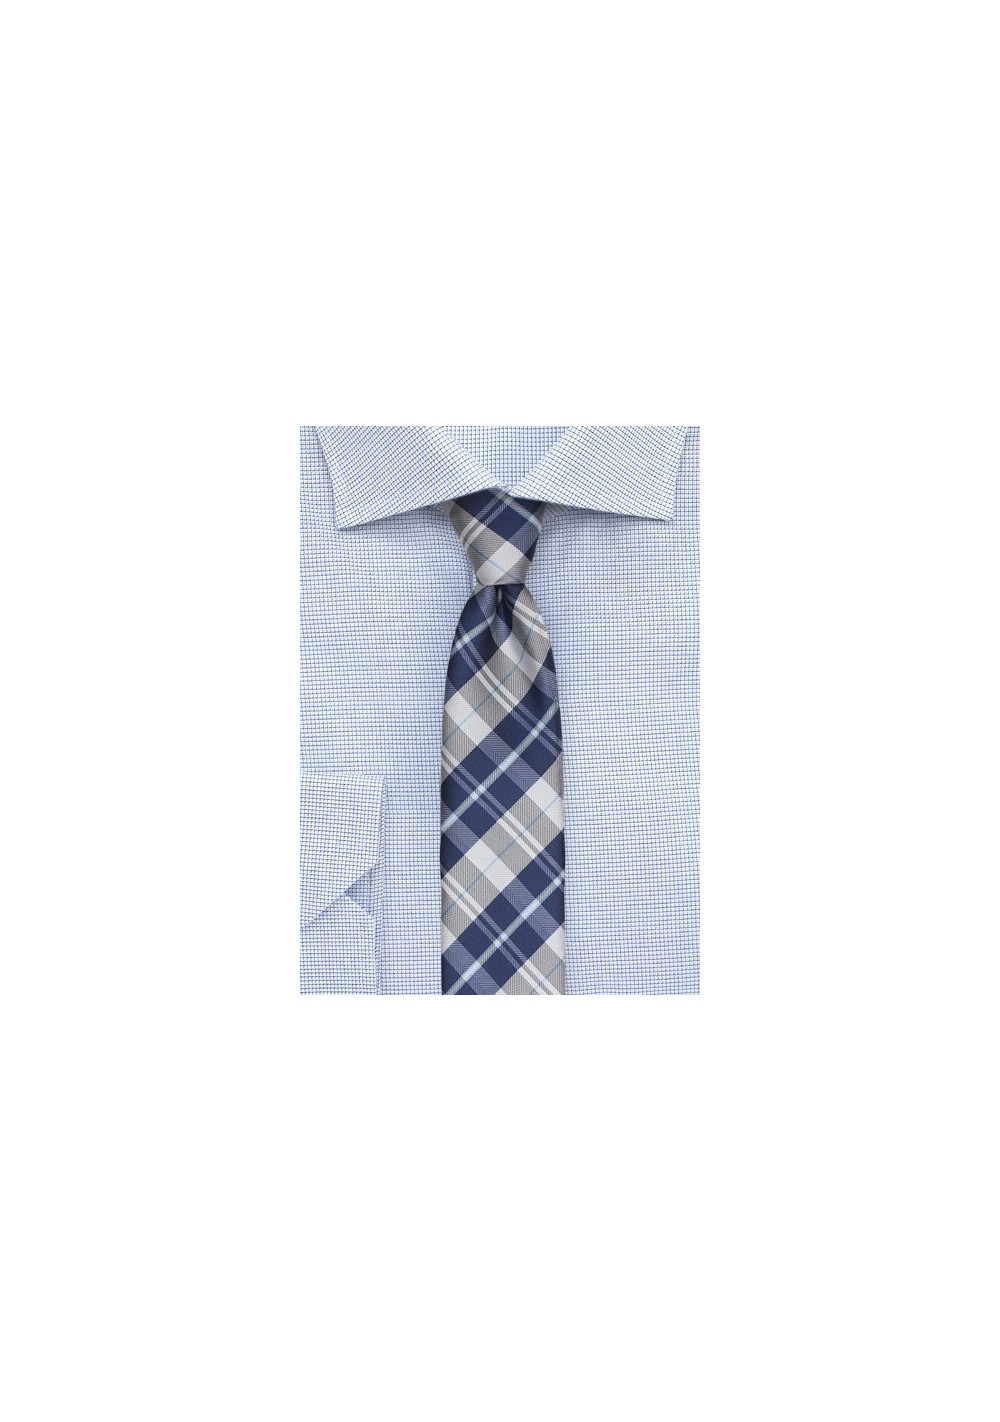 Tartan Plaid Tie in Royal Blue and Silver